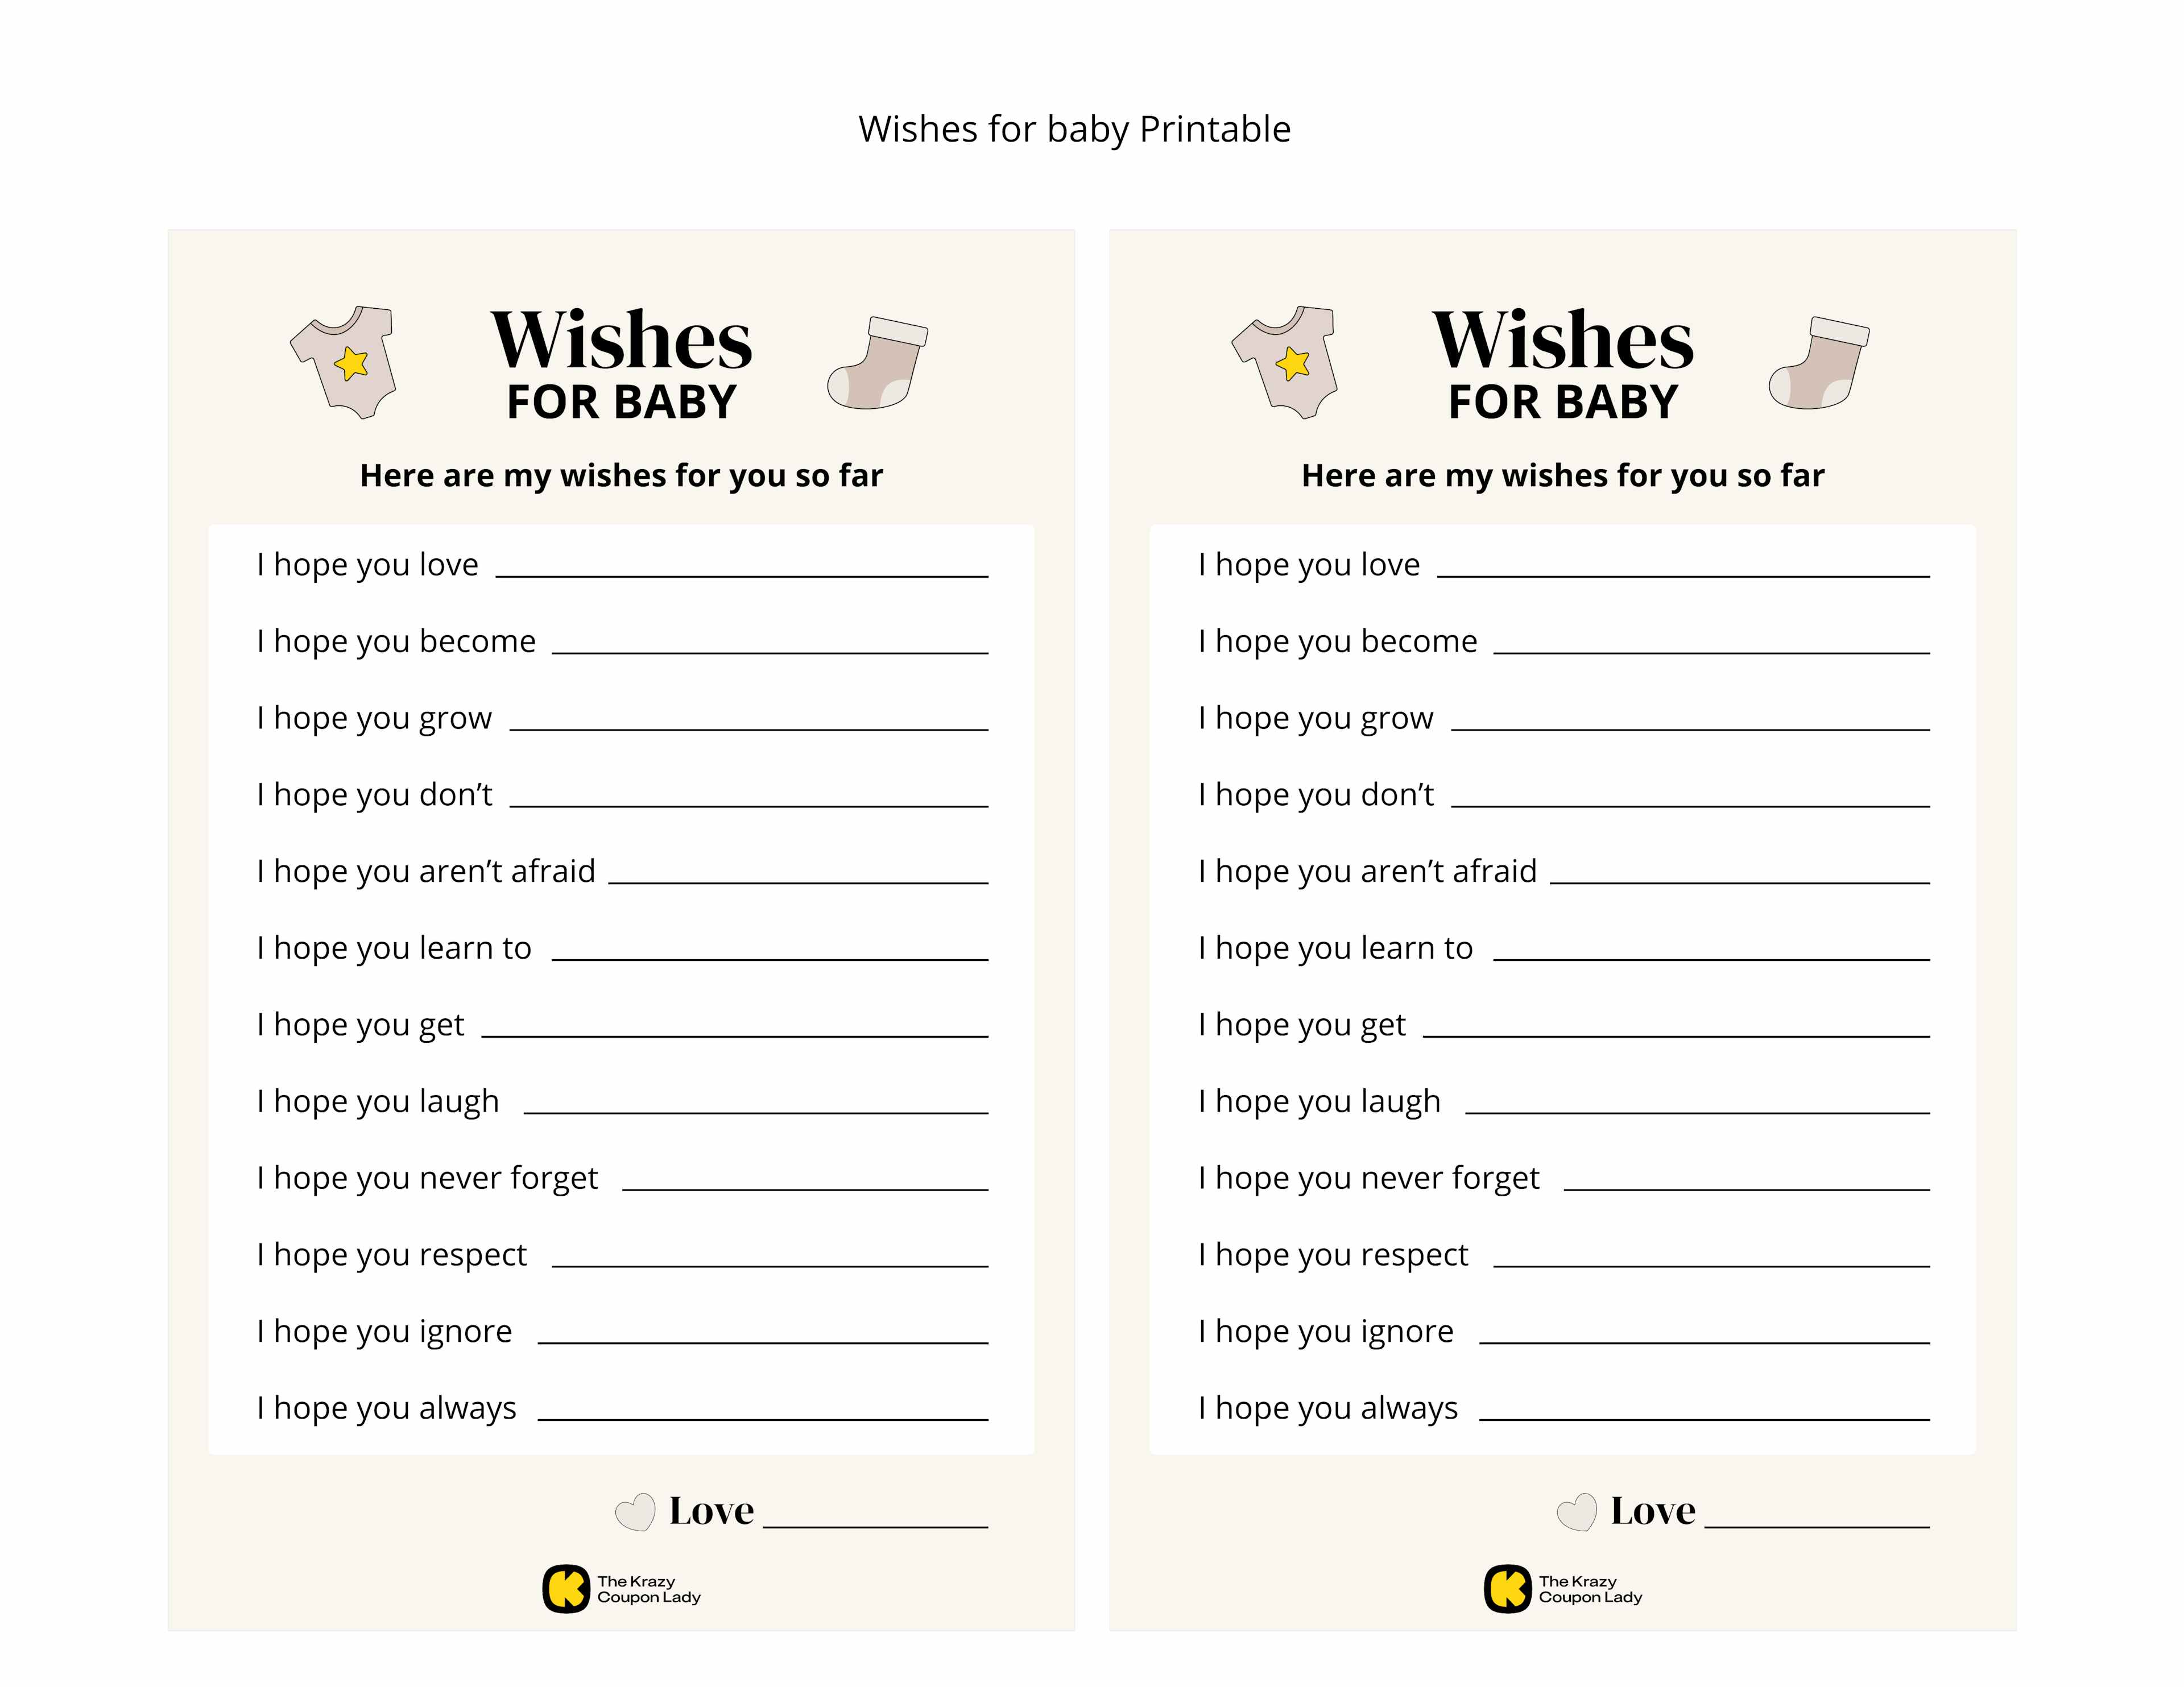 Wishes for baby printable baby shower game